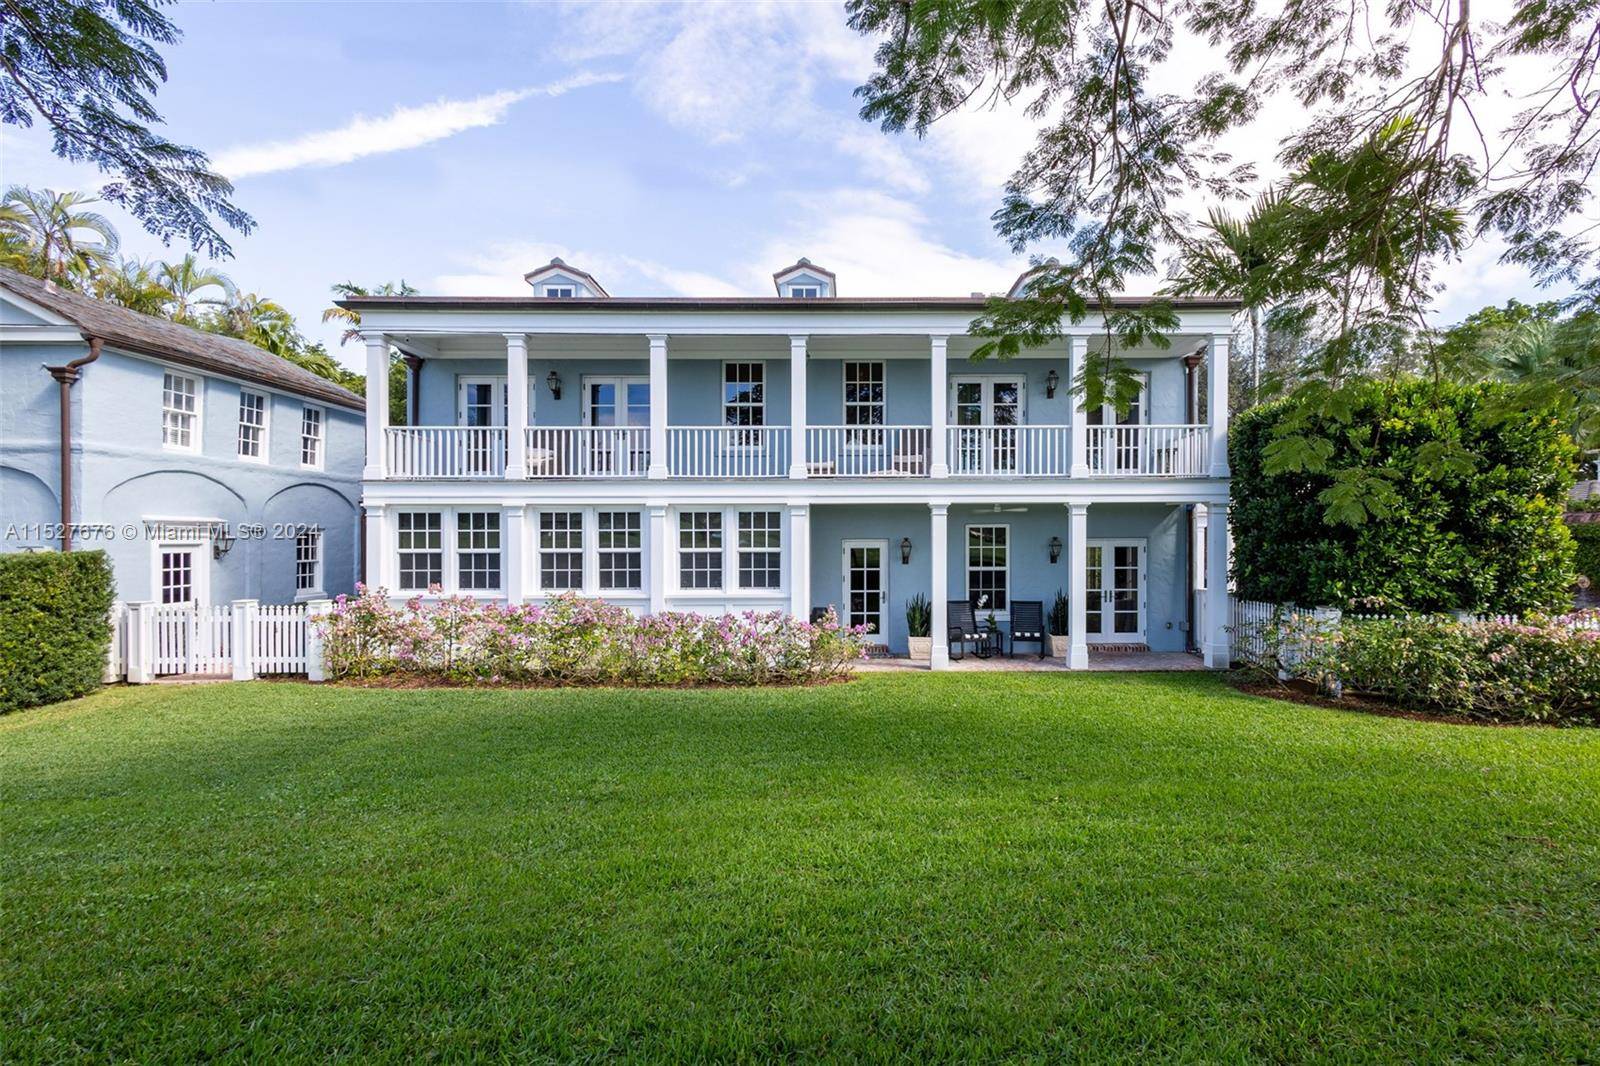 One of five original Coral Gables pioneer village homes, this impeccable 1938 8, 711 SF estate on picturesque Santa Maria Street overlooks the 15th hole of the Riviera Golf Course.